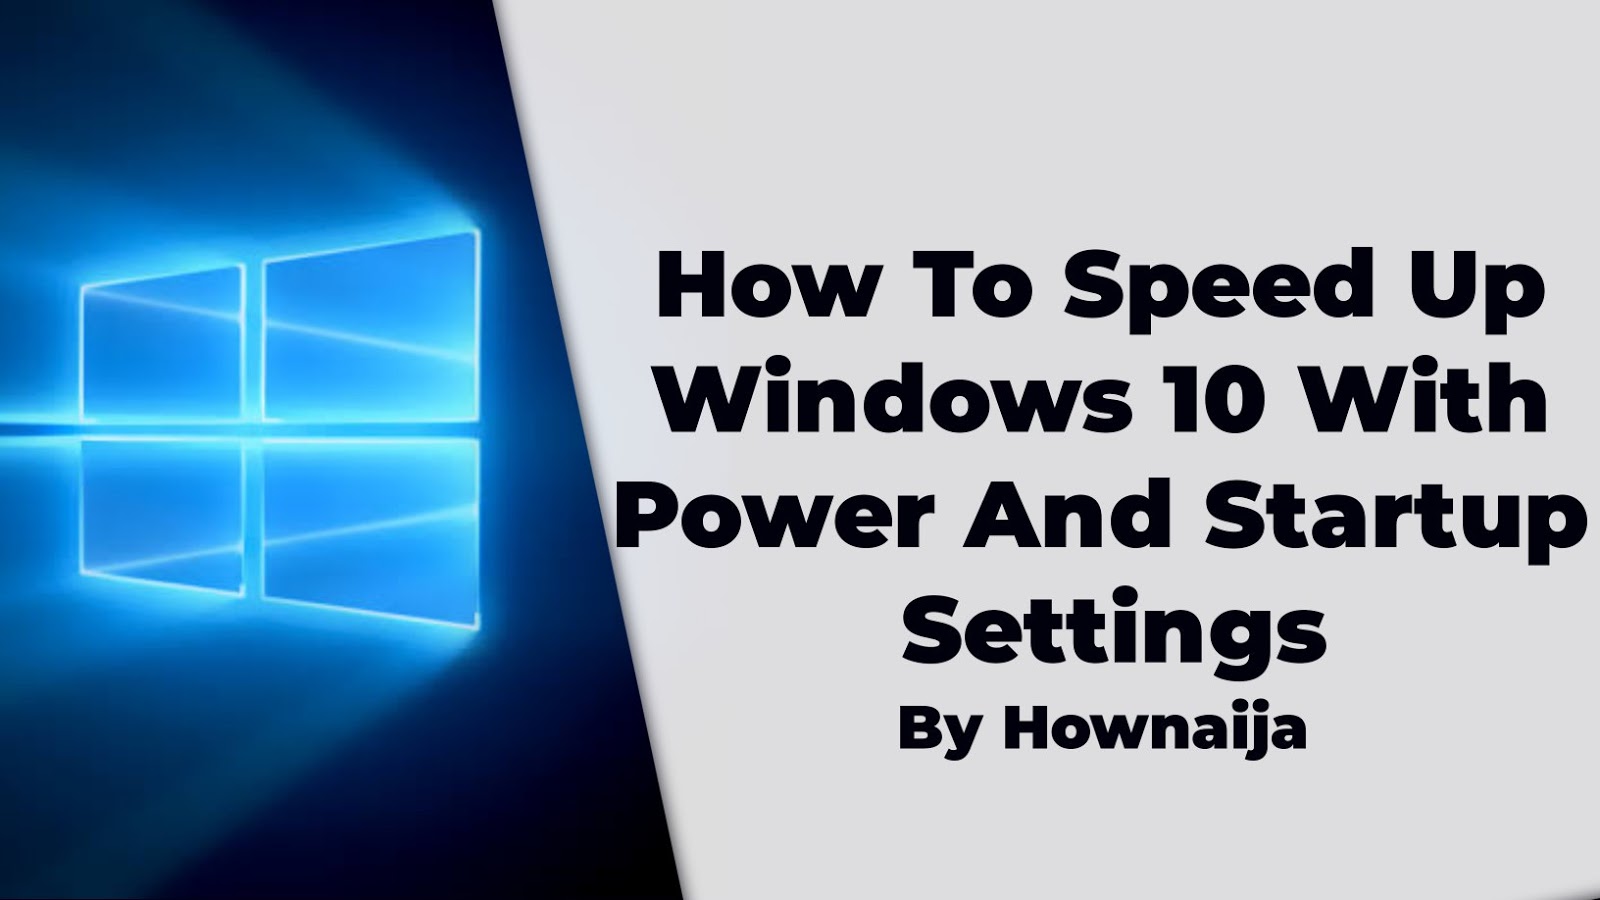 How To Speed Up Windows 10 With Power And Startup Settings